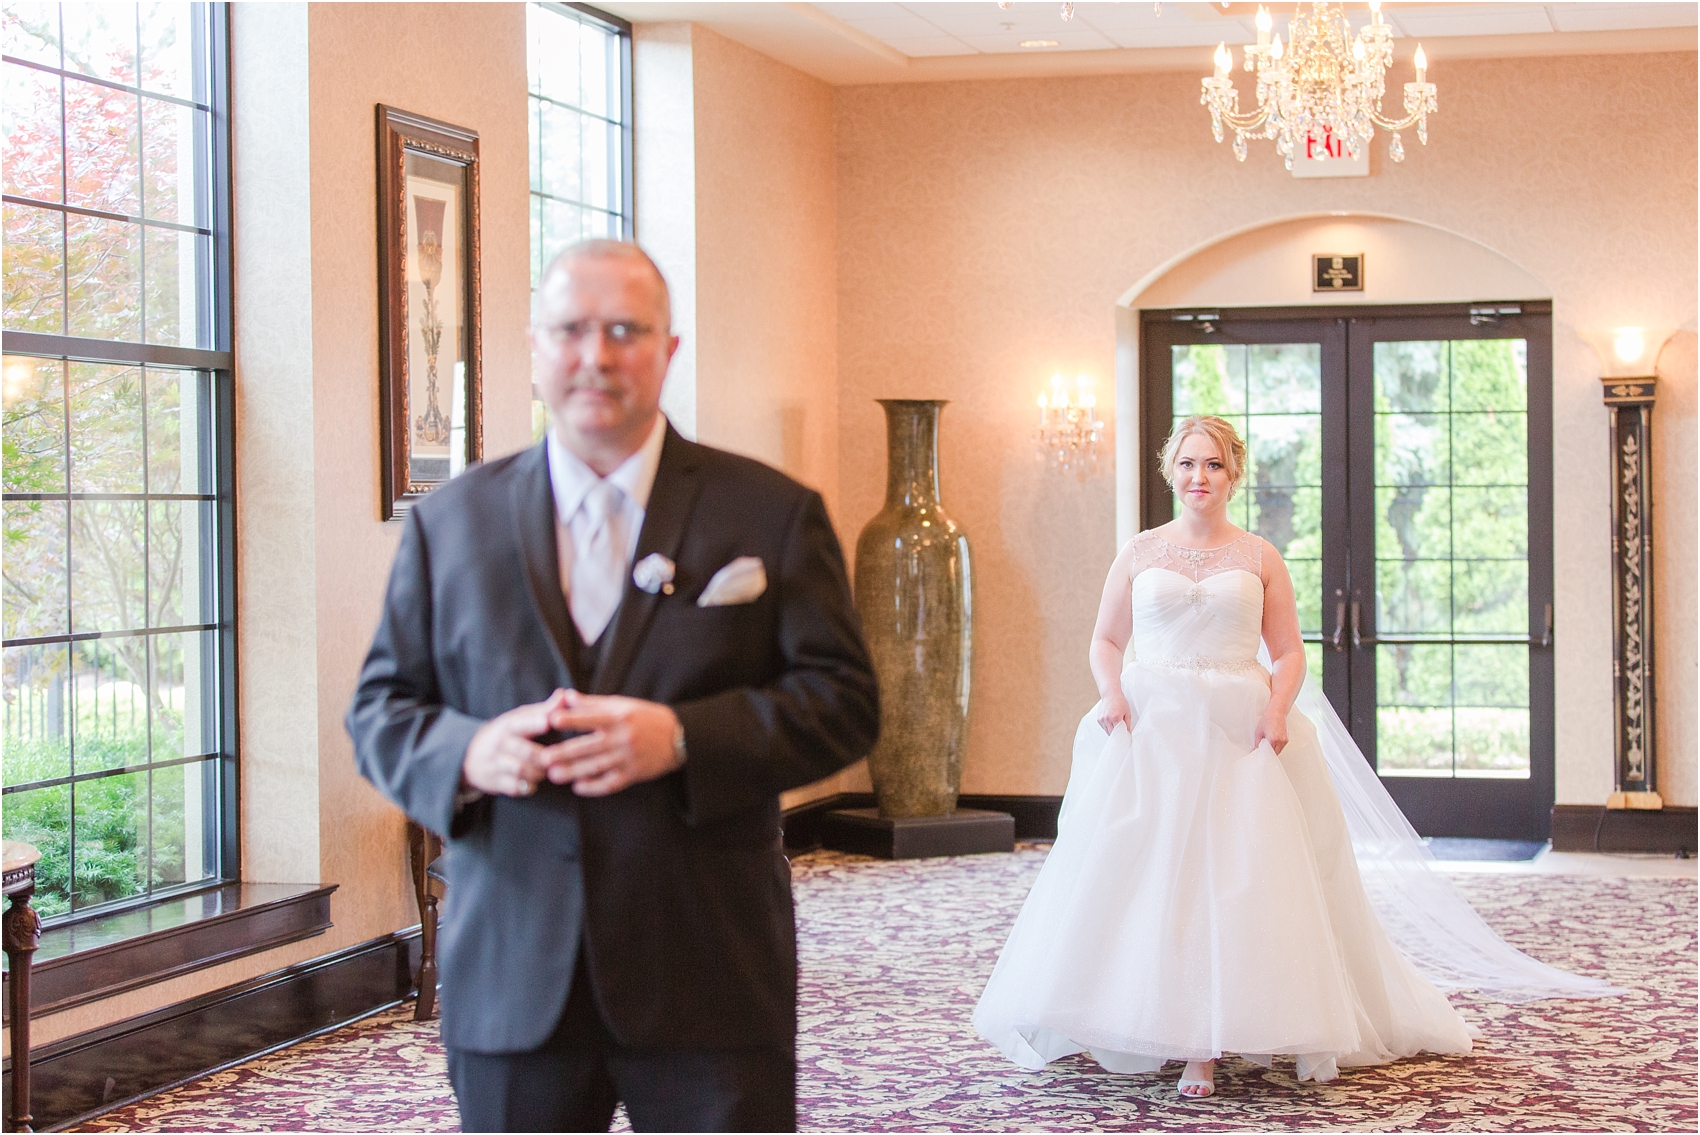 father-and-bride-share-emotional-first-look-on-wedding-day-photos-in-detroit-michigan-by-courtney-carolyn-photography_0001.jpg